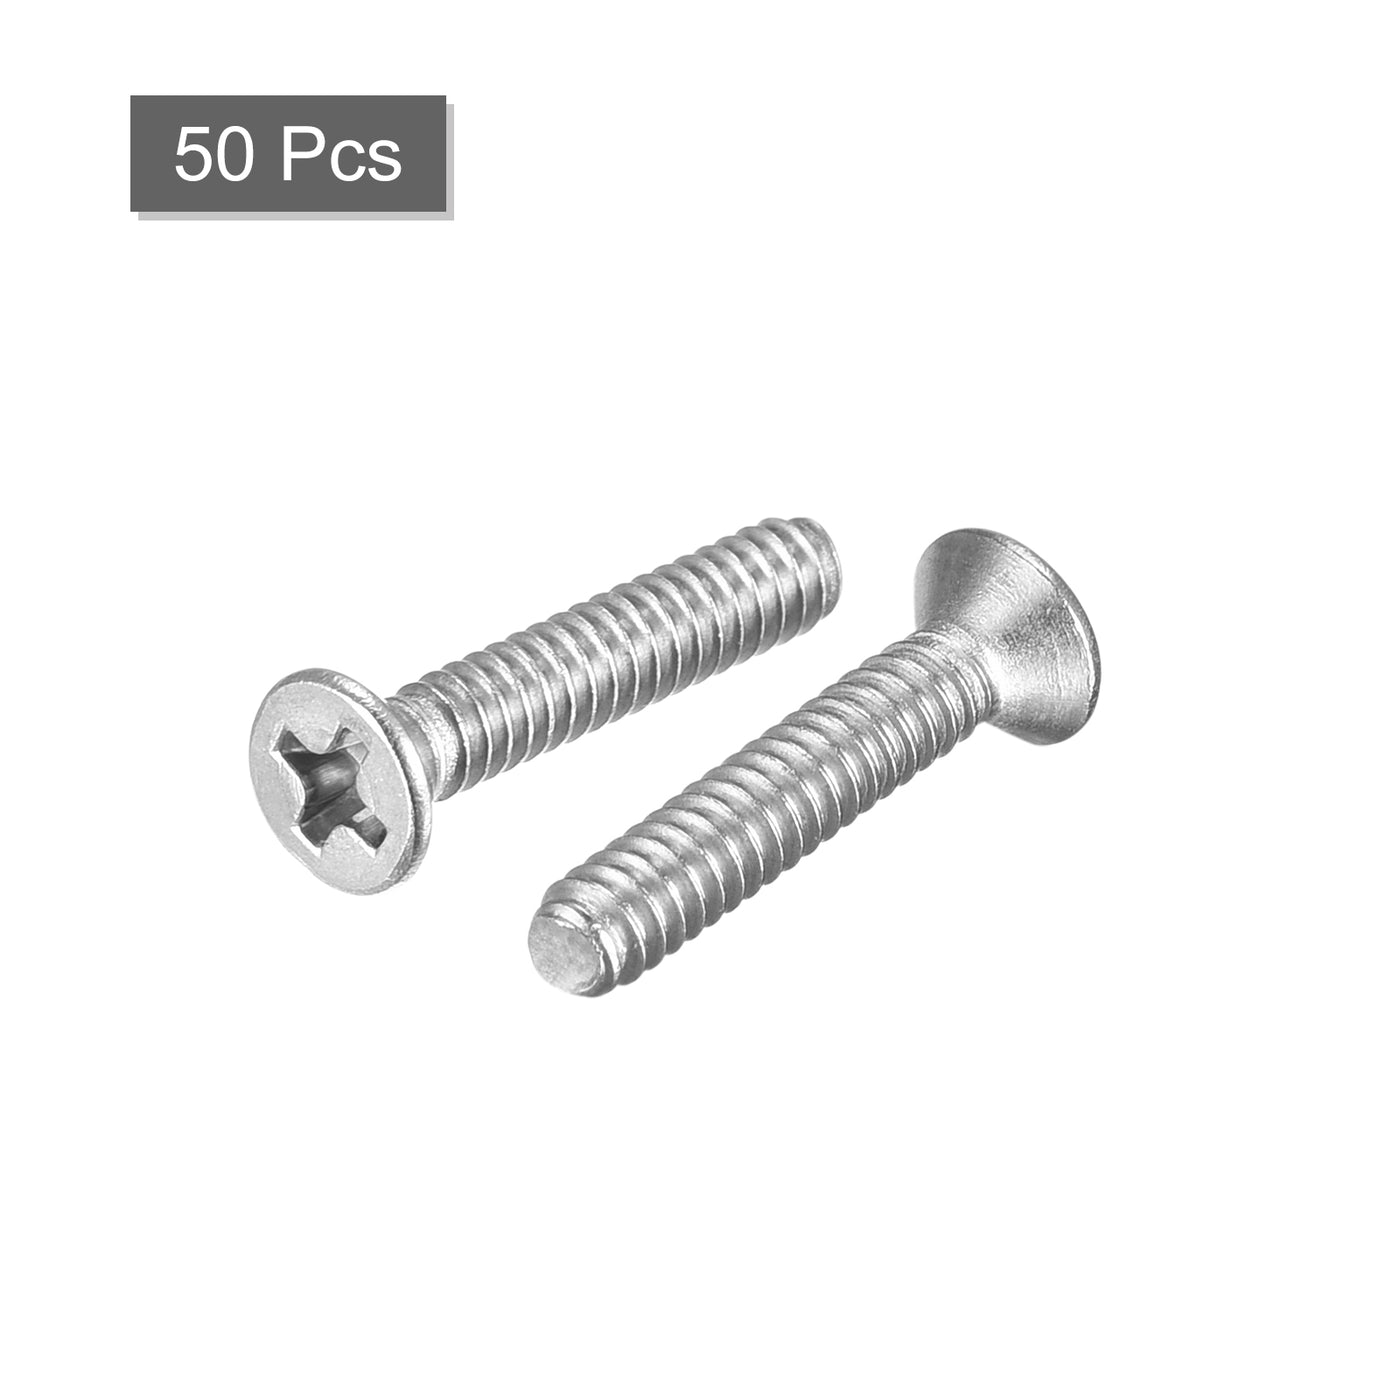 uxcell Uxcell 6#-32x3/4" Flat Head Machine Screws Phillips 304 Stainless Steel Bolts 50pcs